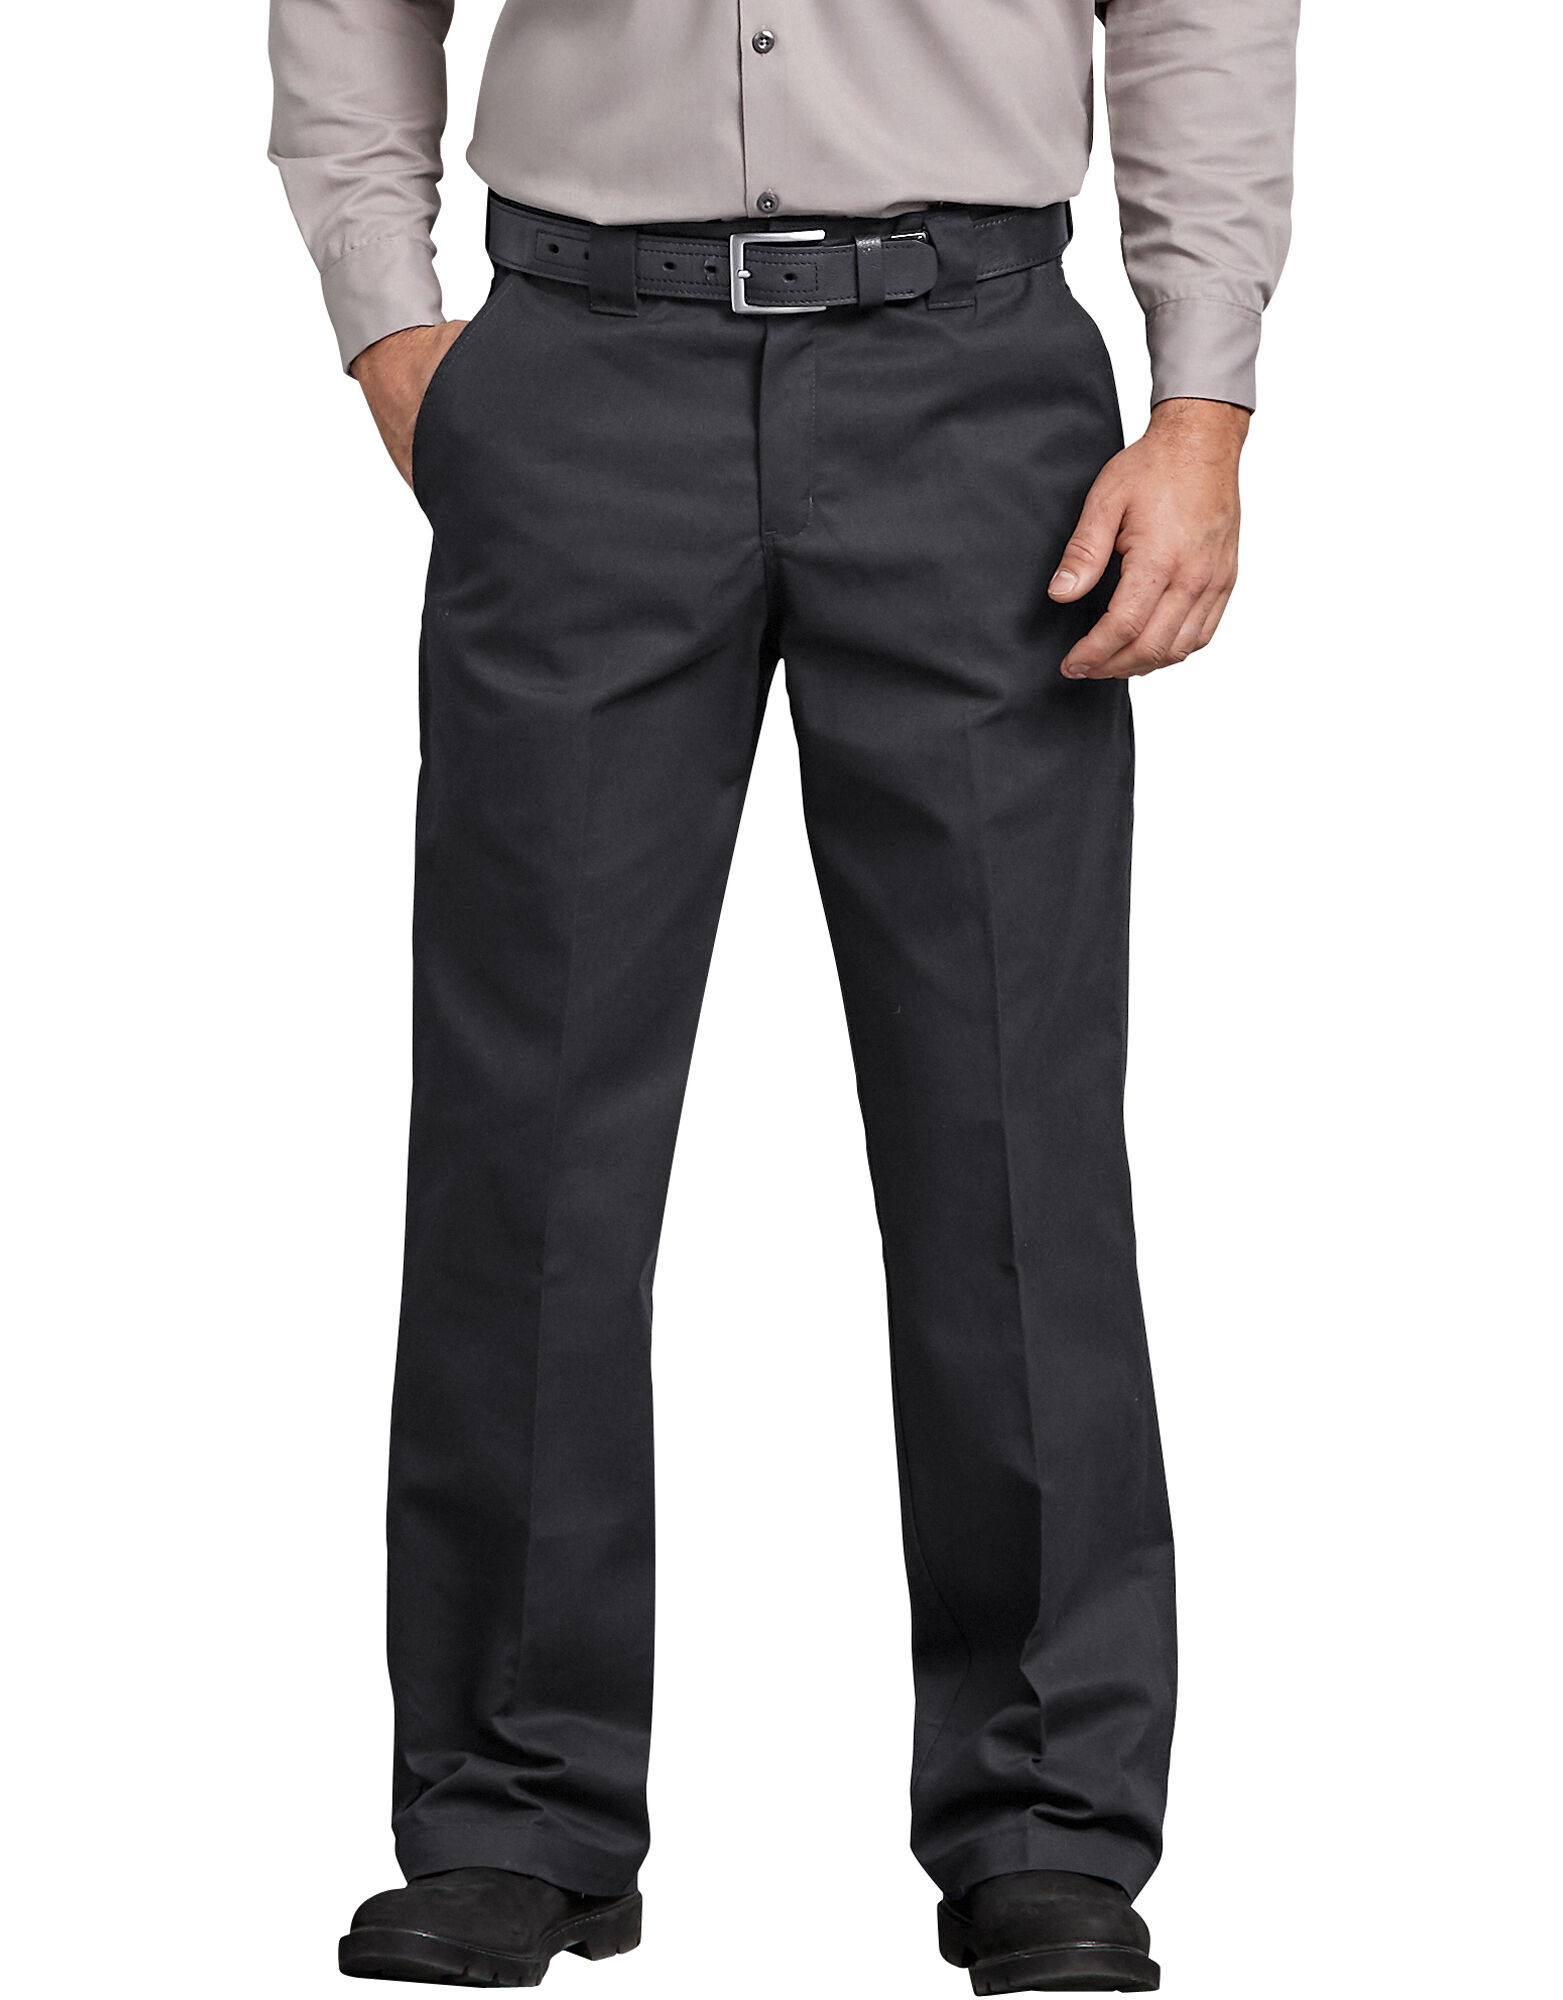 Comfort Waist Pants | Relaxed Fit Twill | Dickies